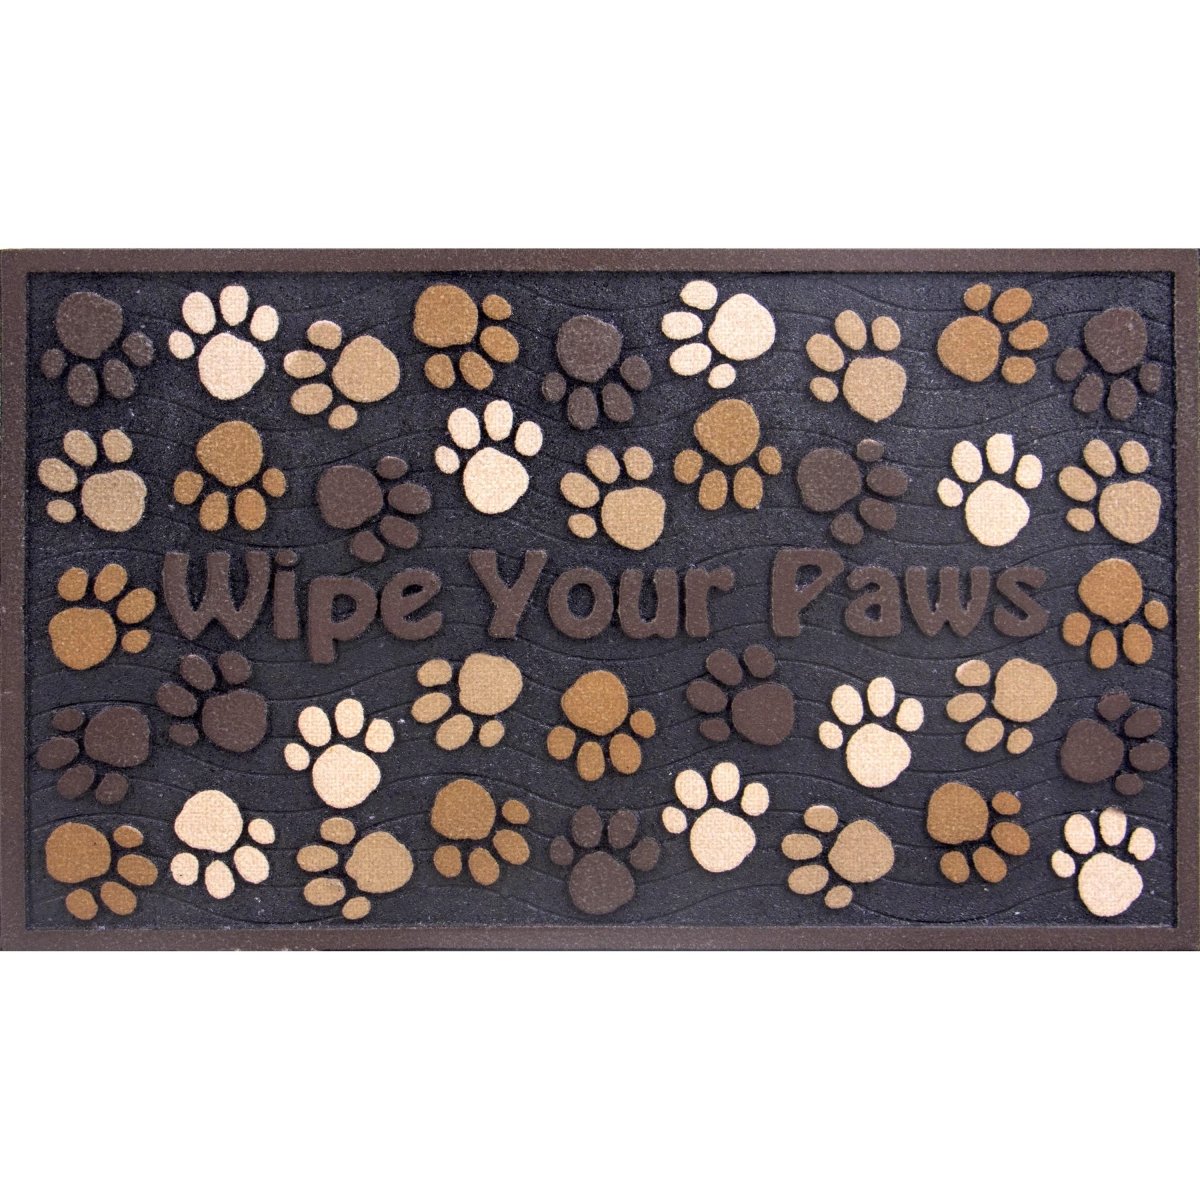 Masterpiece Wipe Your Paws Teal